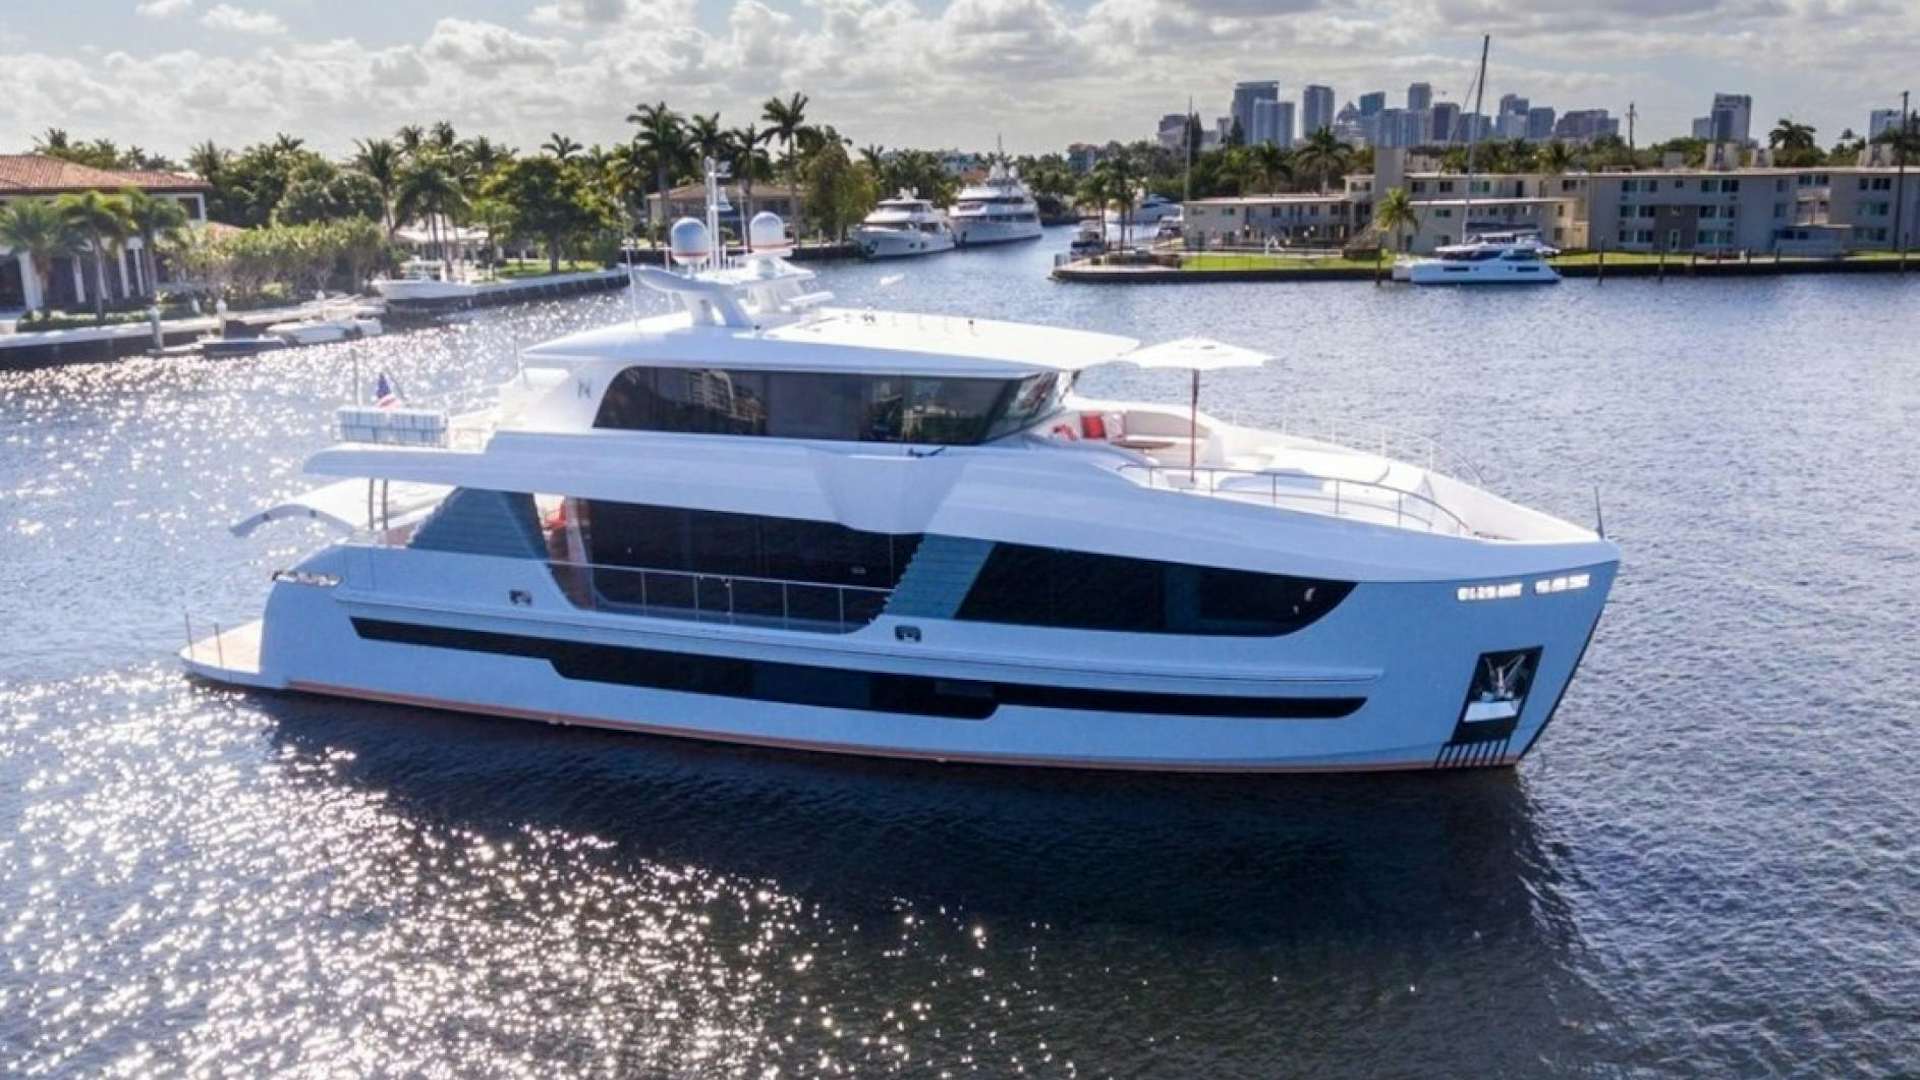 Watch Video for GG Yacht for Sale